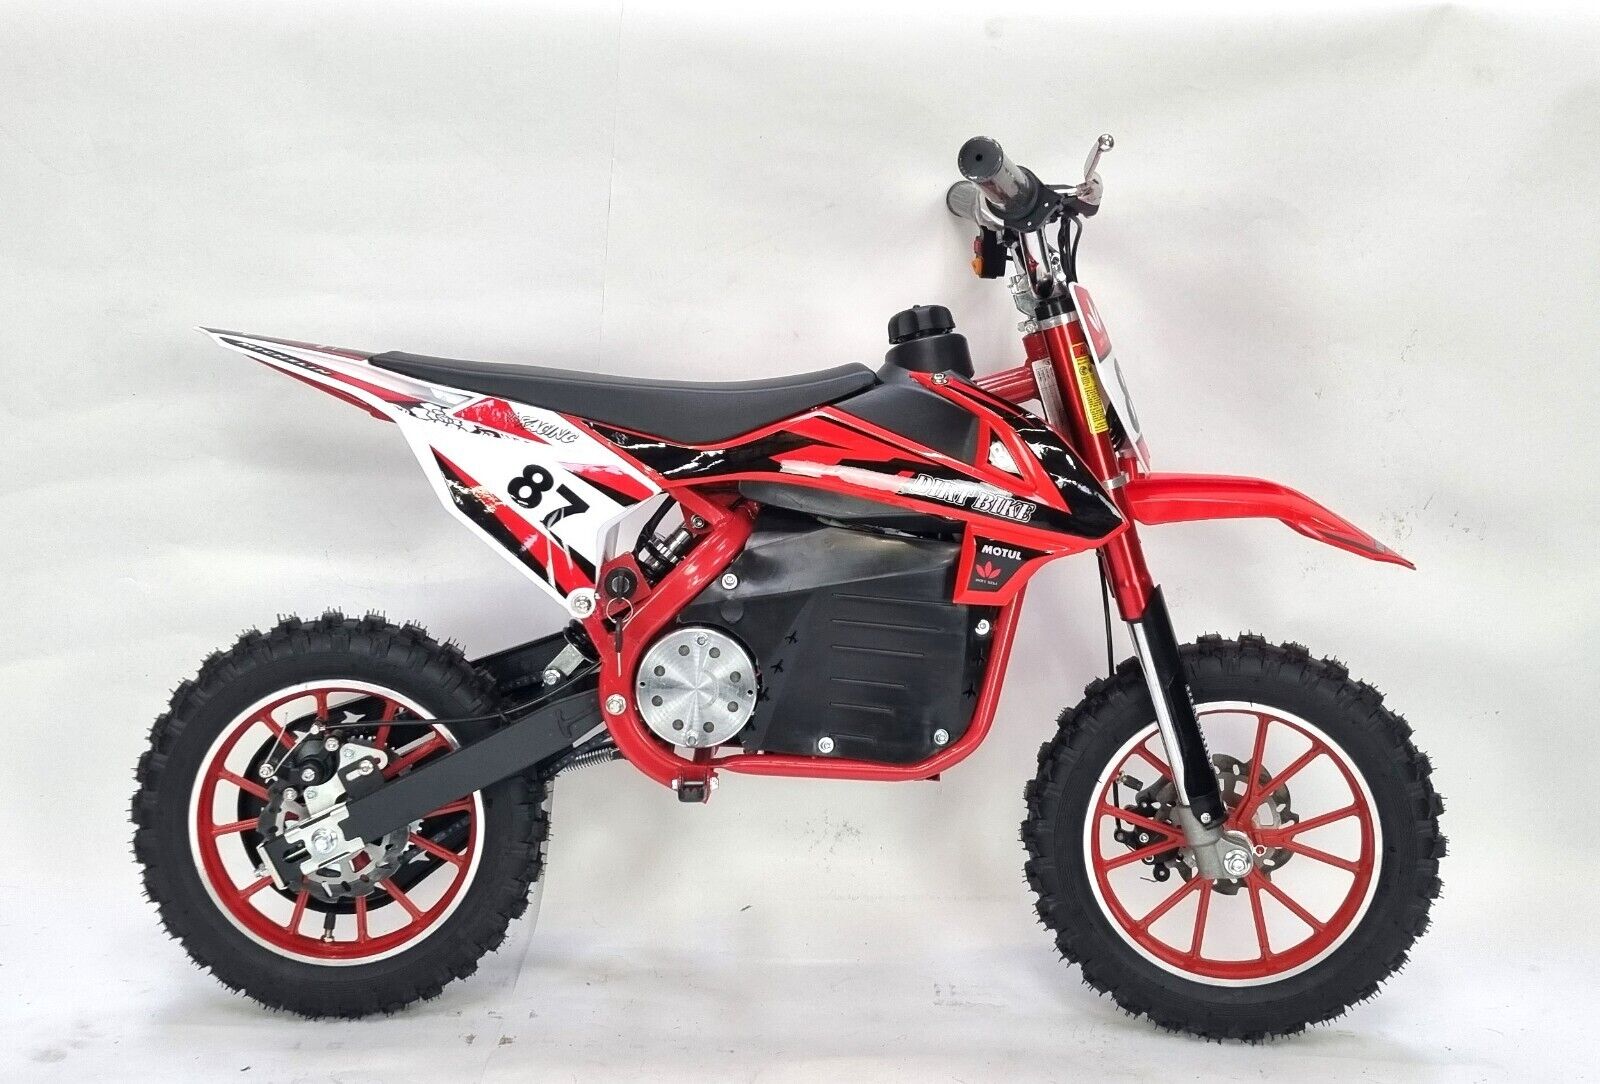 Special-Edition Off-Road Dirt Bike